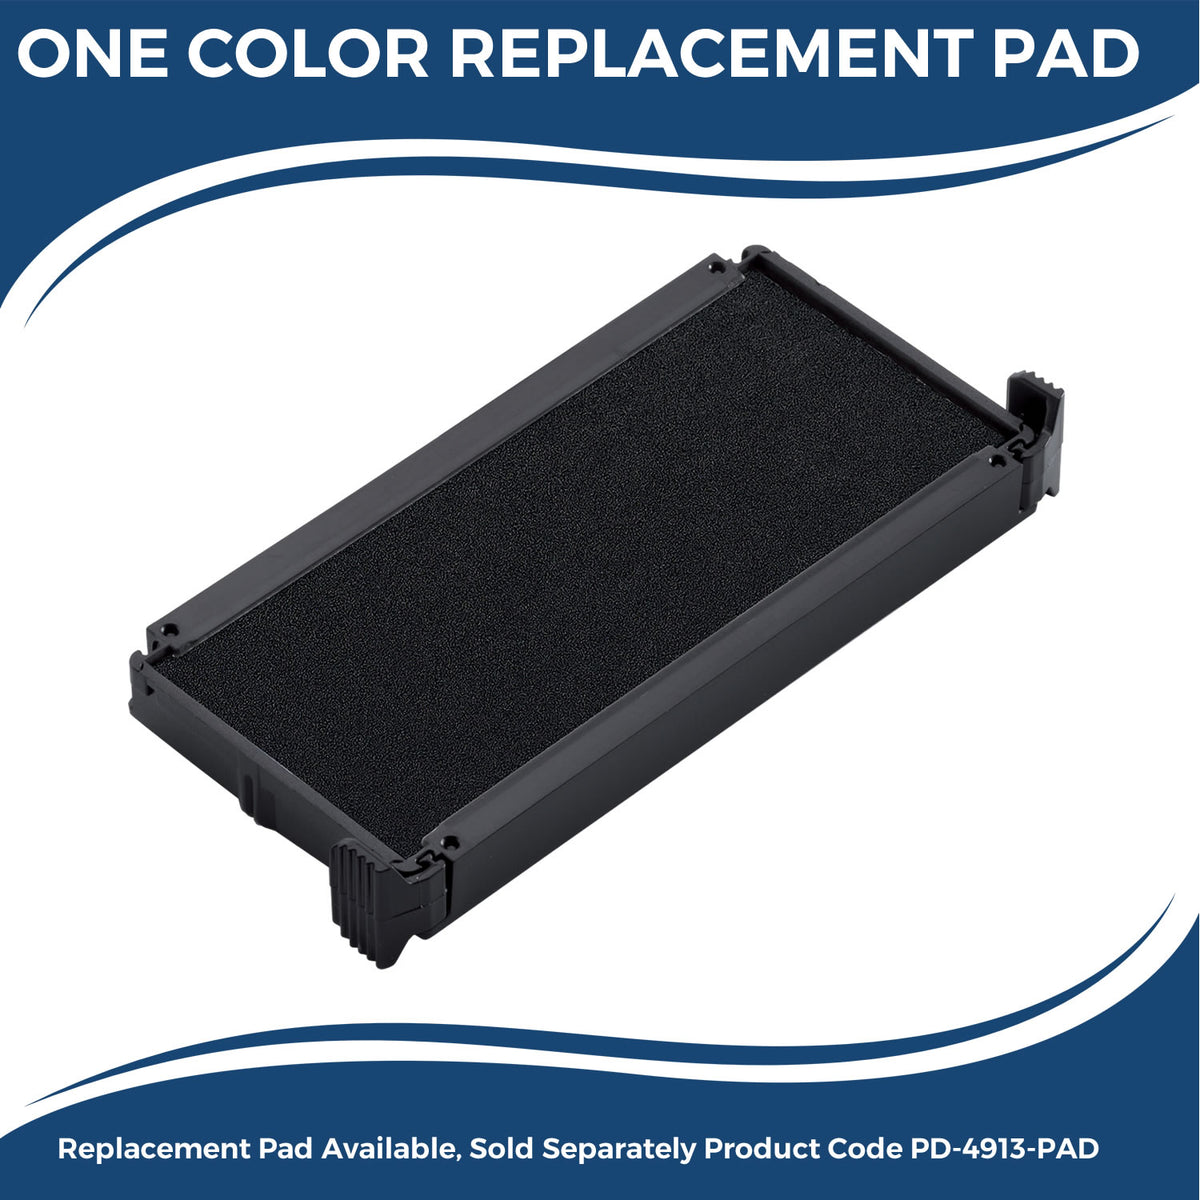 Large Self-Inking Amortizado Stamp 5538S Large Replacment Pad